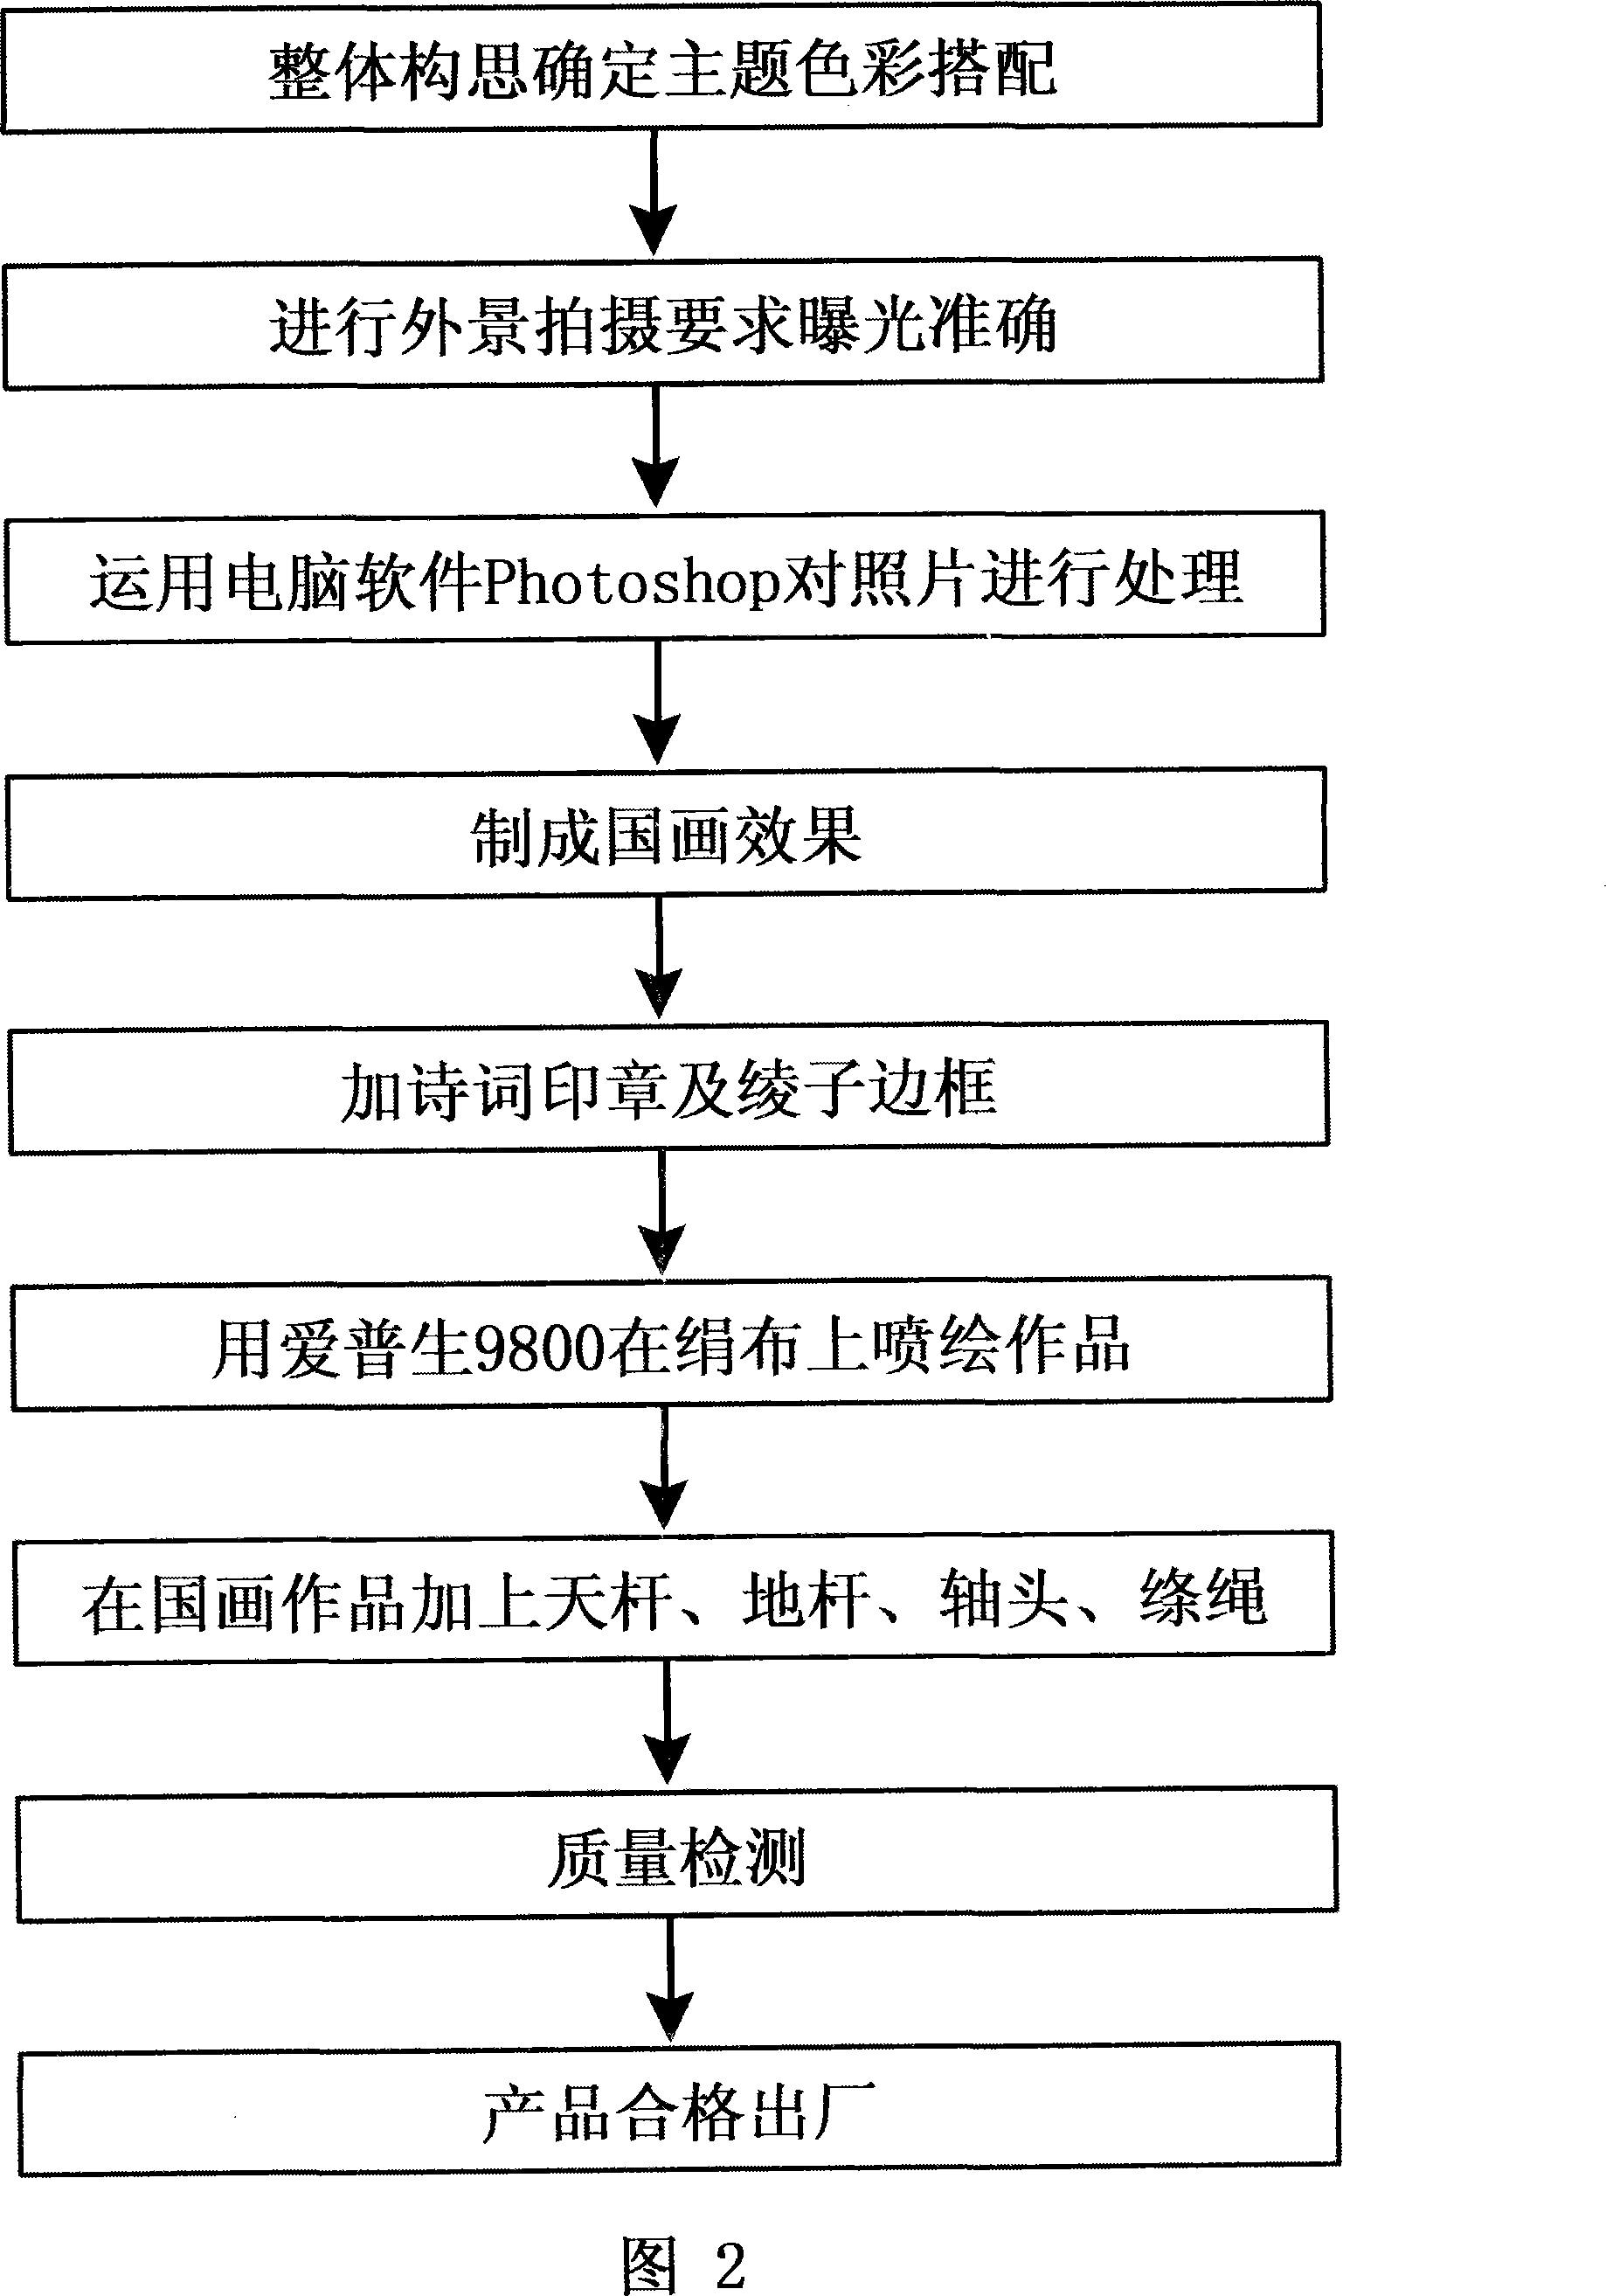 Method for making Chinese picture by employing photographic art process